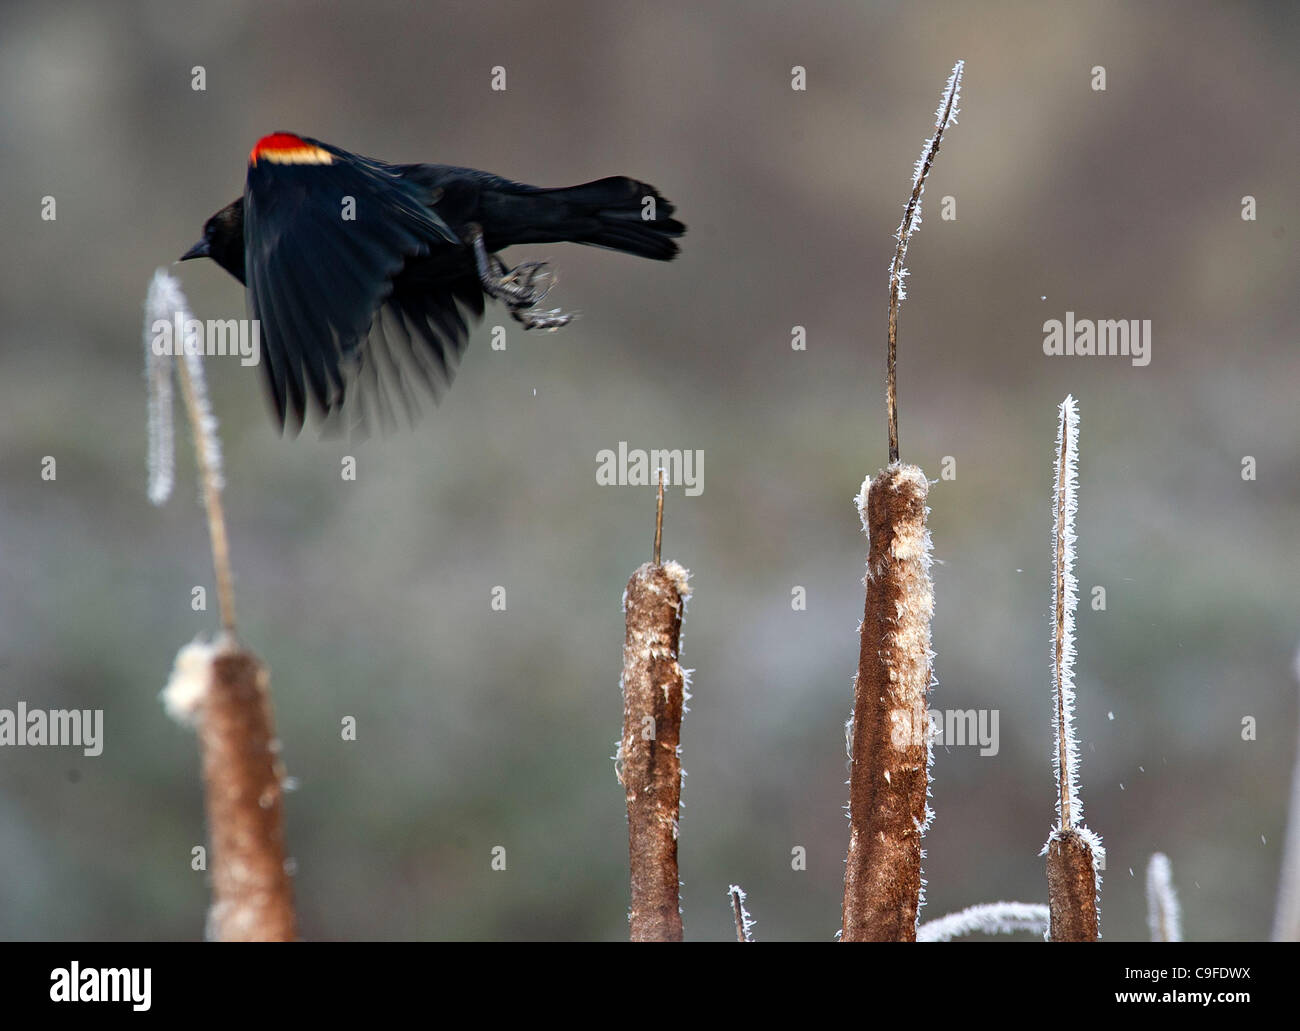 Dec. 14, 2011 - Dixonville, Oregon, U.S - A red-winged blackbird takes to the air from its perch on a frosty cattail in a marsh in Dixonville. The red-winged blackbird is one of the most abundant species of bird in North America. (Credit Image: © Robin Loznak/ZUMAPRESS.com) Stock Photo